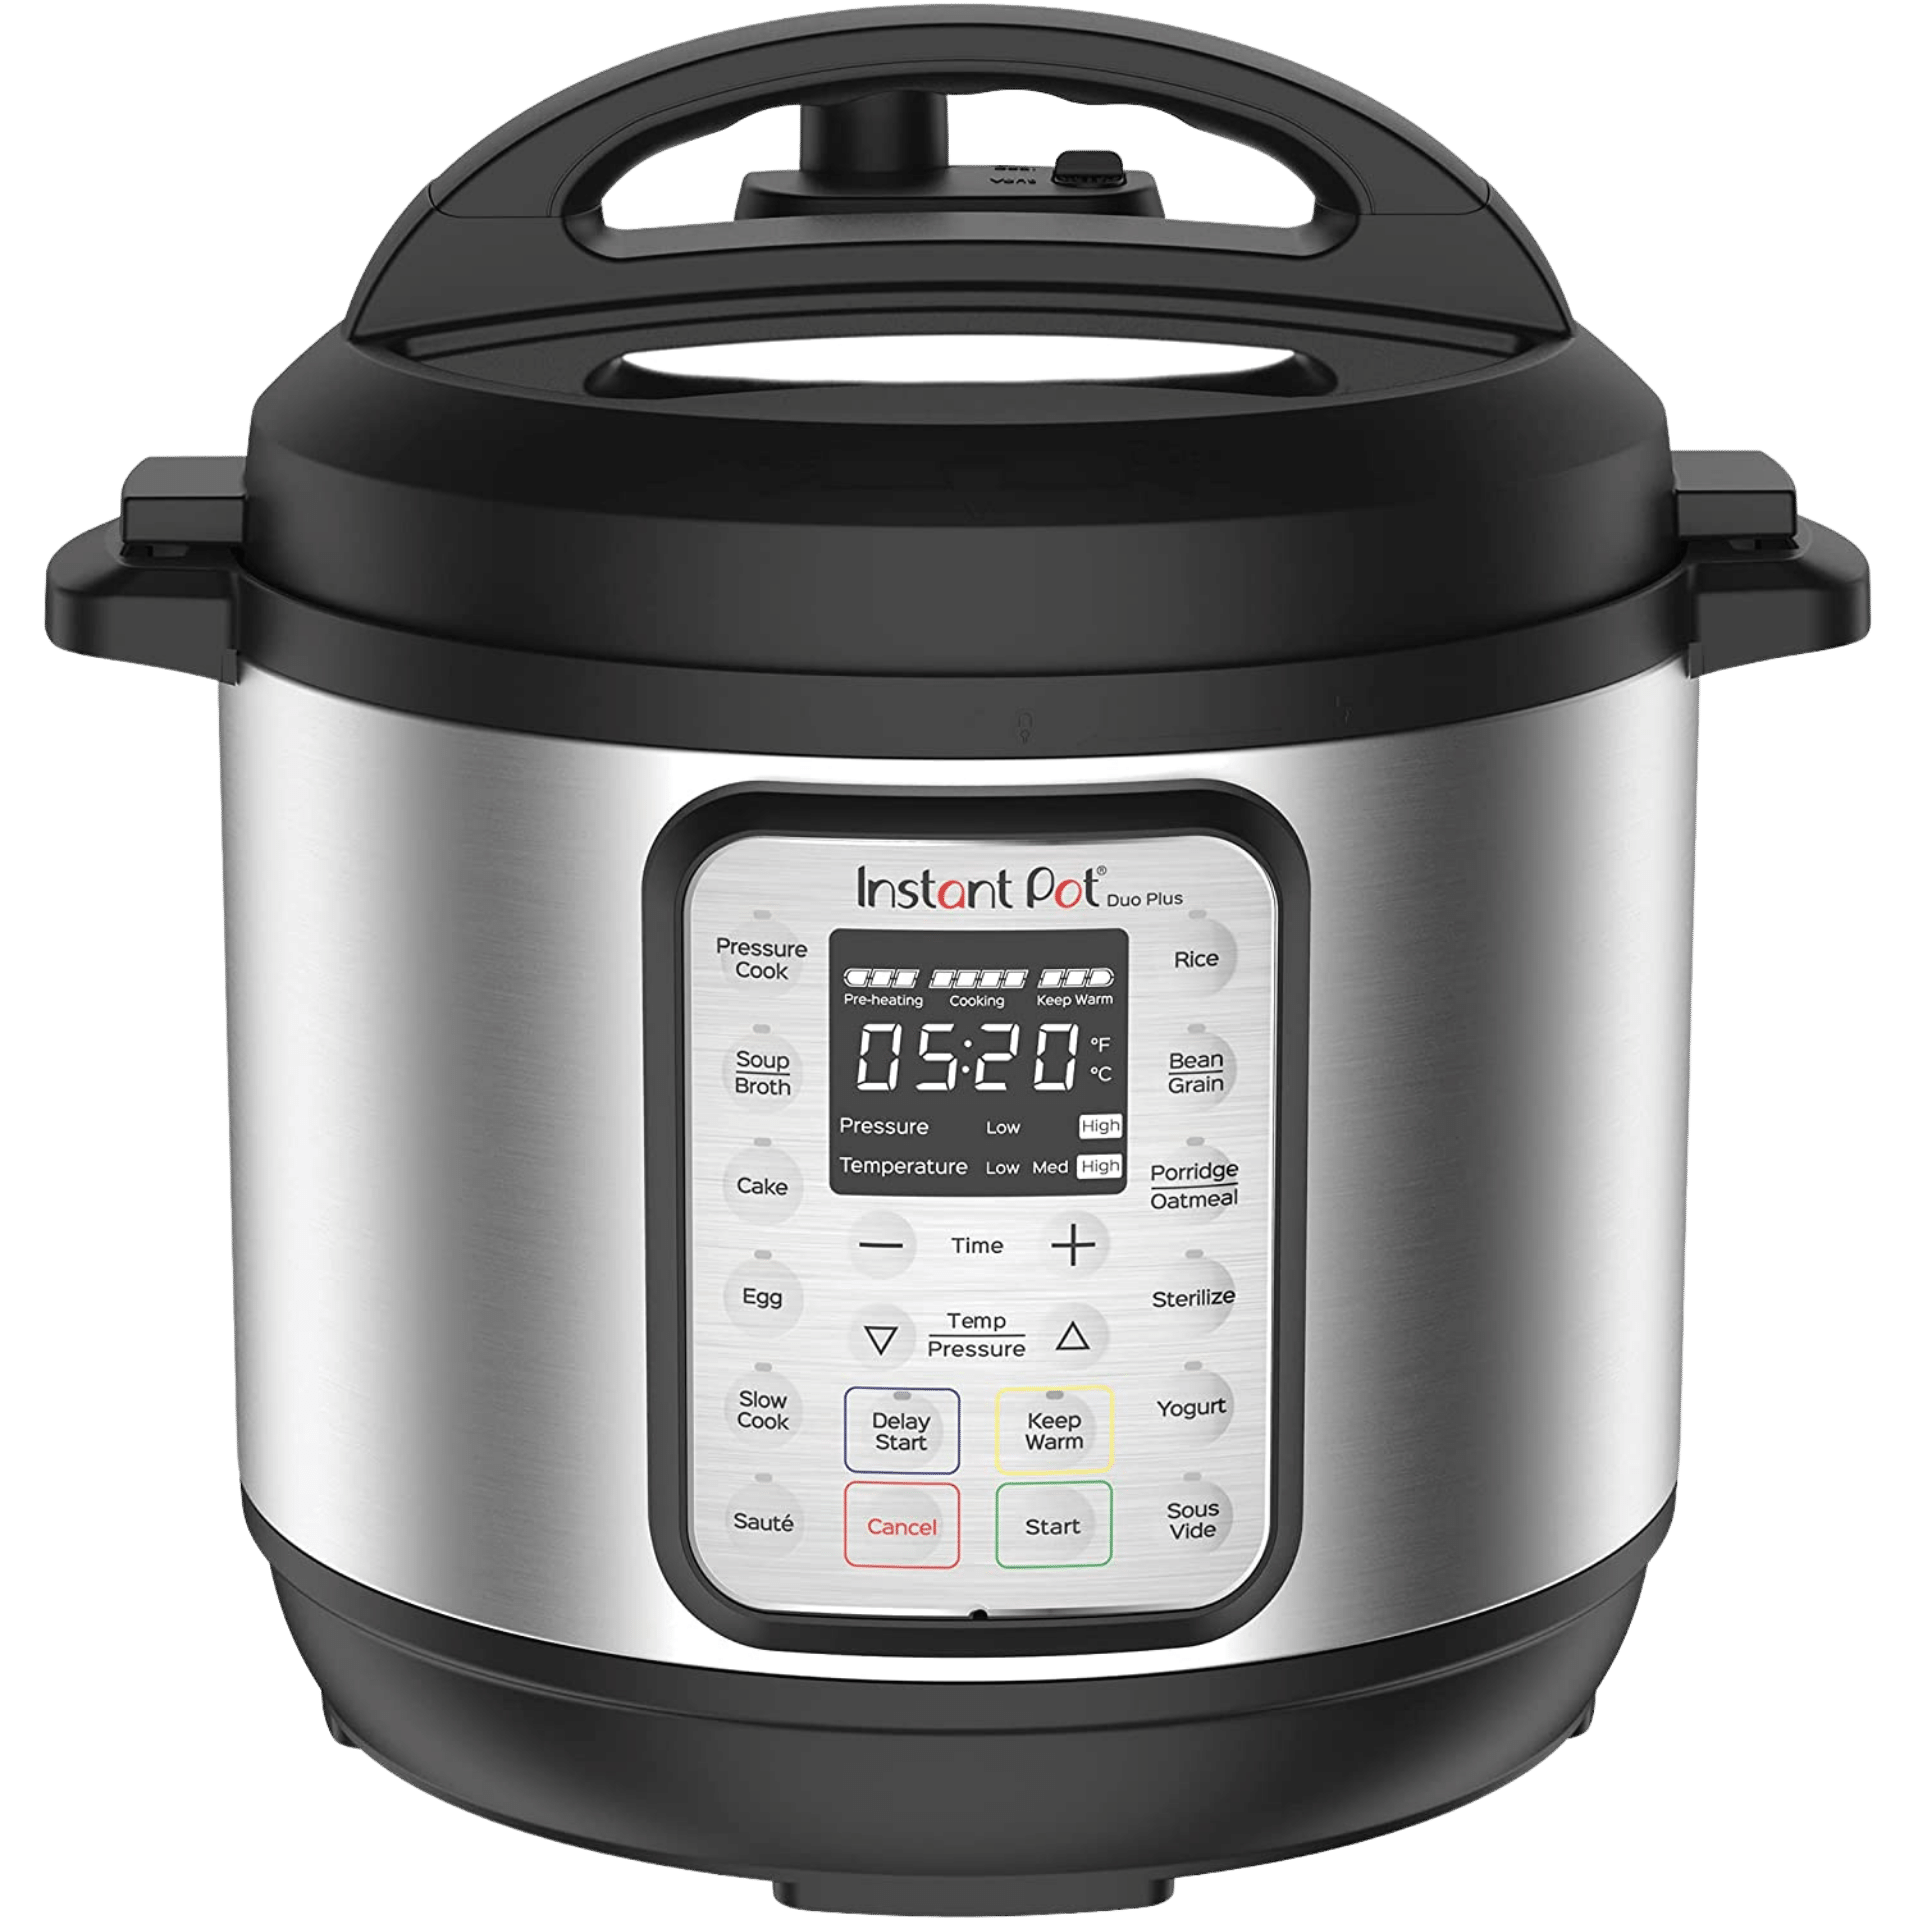 Product Image of Instant Pot Duo Plus